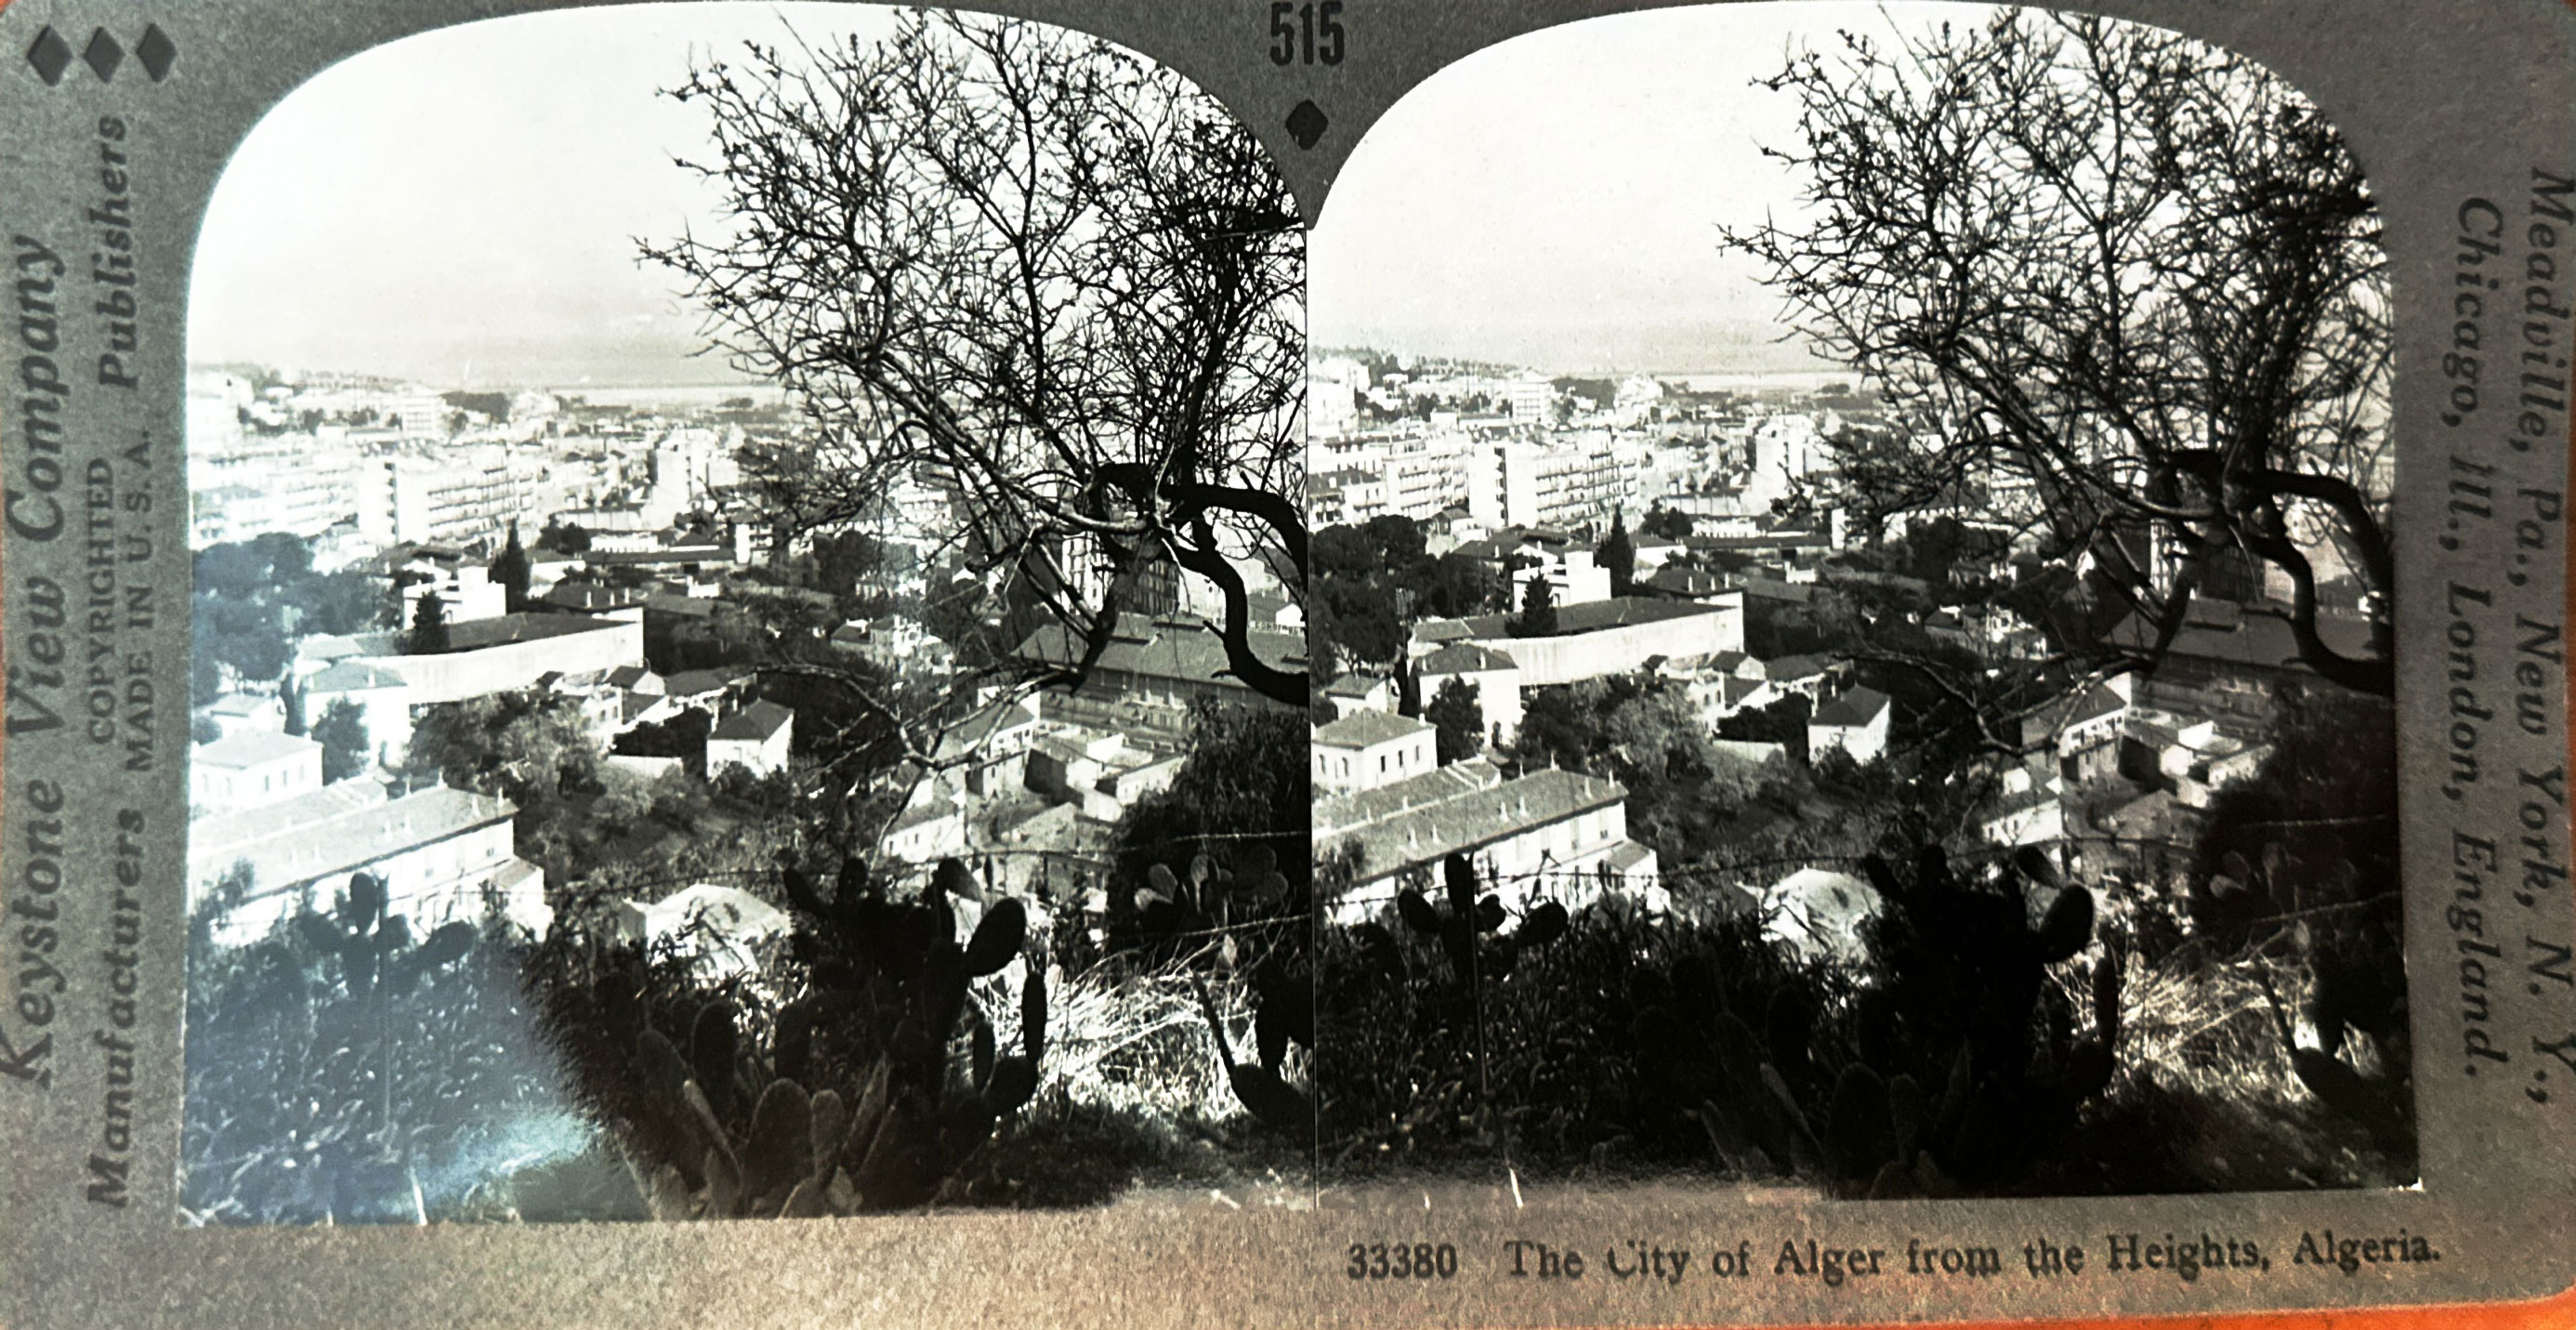 <p>The City of Alger from the Heights, Algeria. (sic)</p>